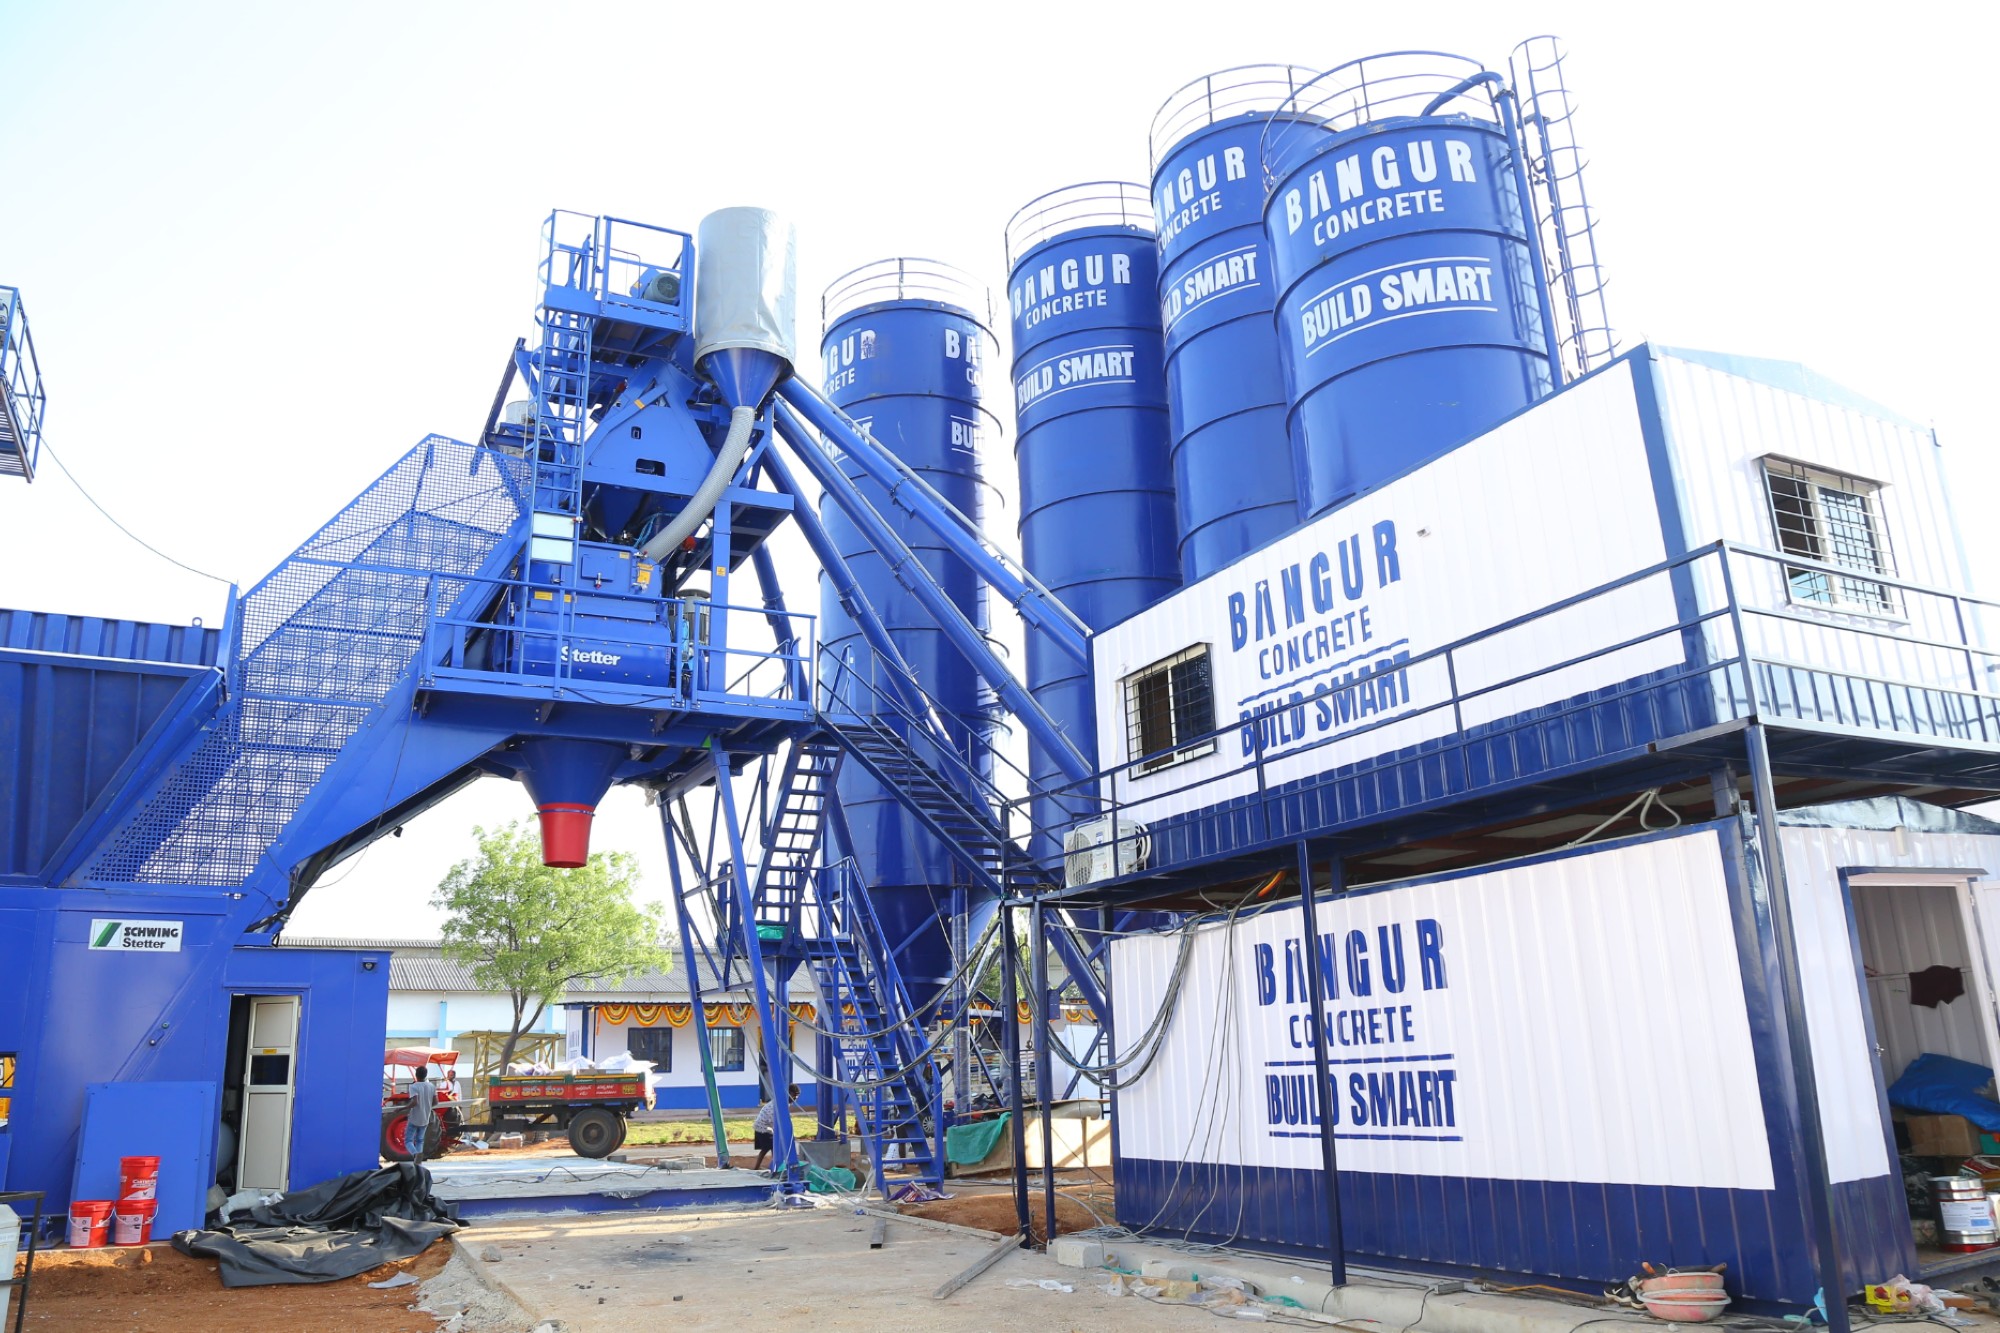 Shree Cement Limited announced the launch of Bangur Concrete with the commissioning of its first Greenfield Ready Mix Concrete (RMC) plant in Hyderabad.